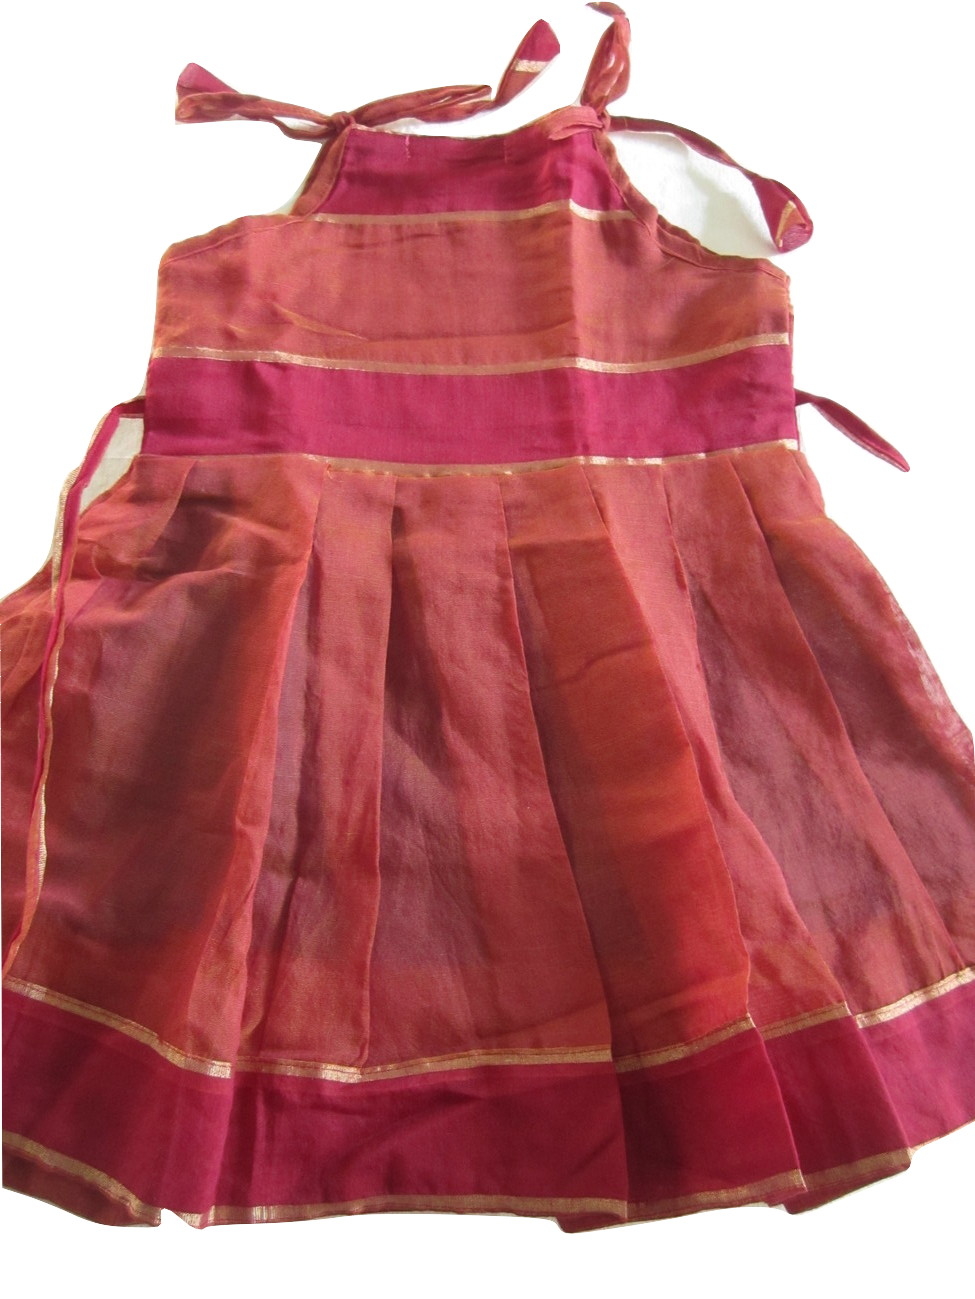 silk gown for baby girl